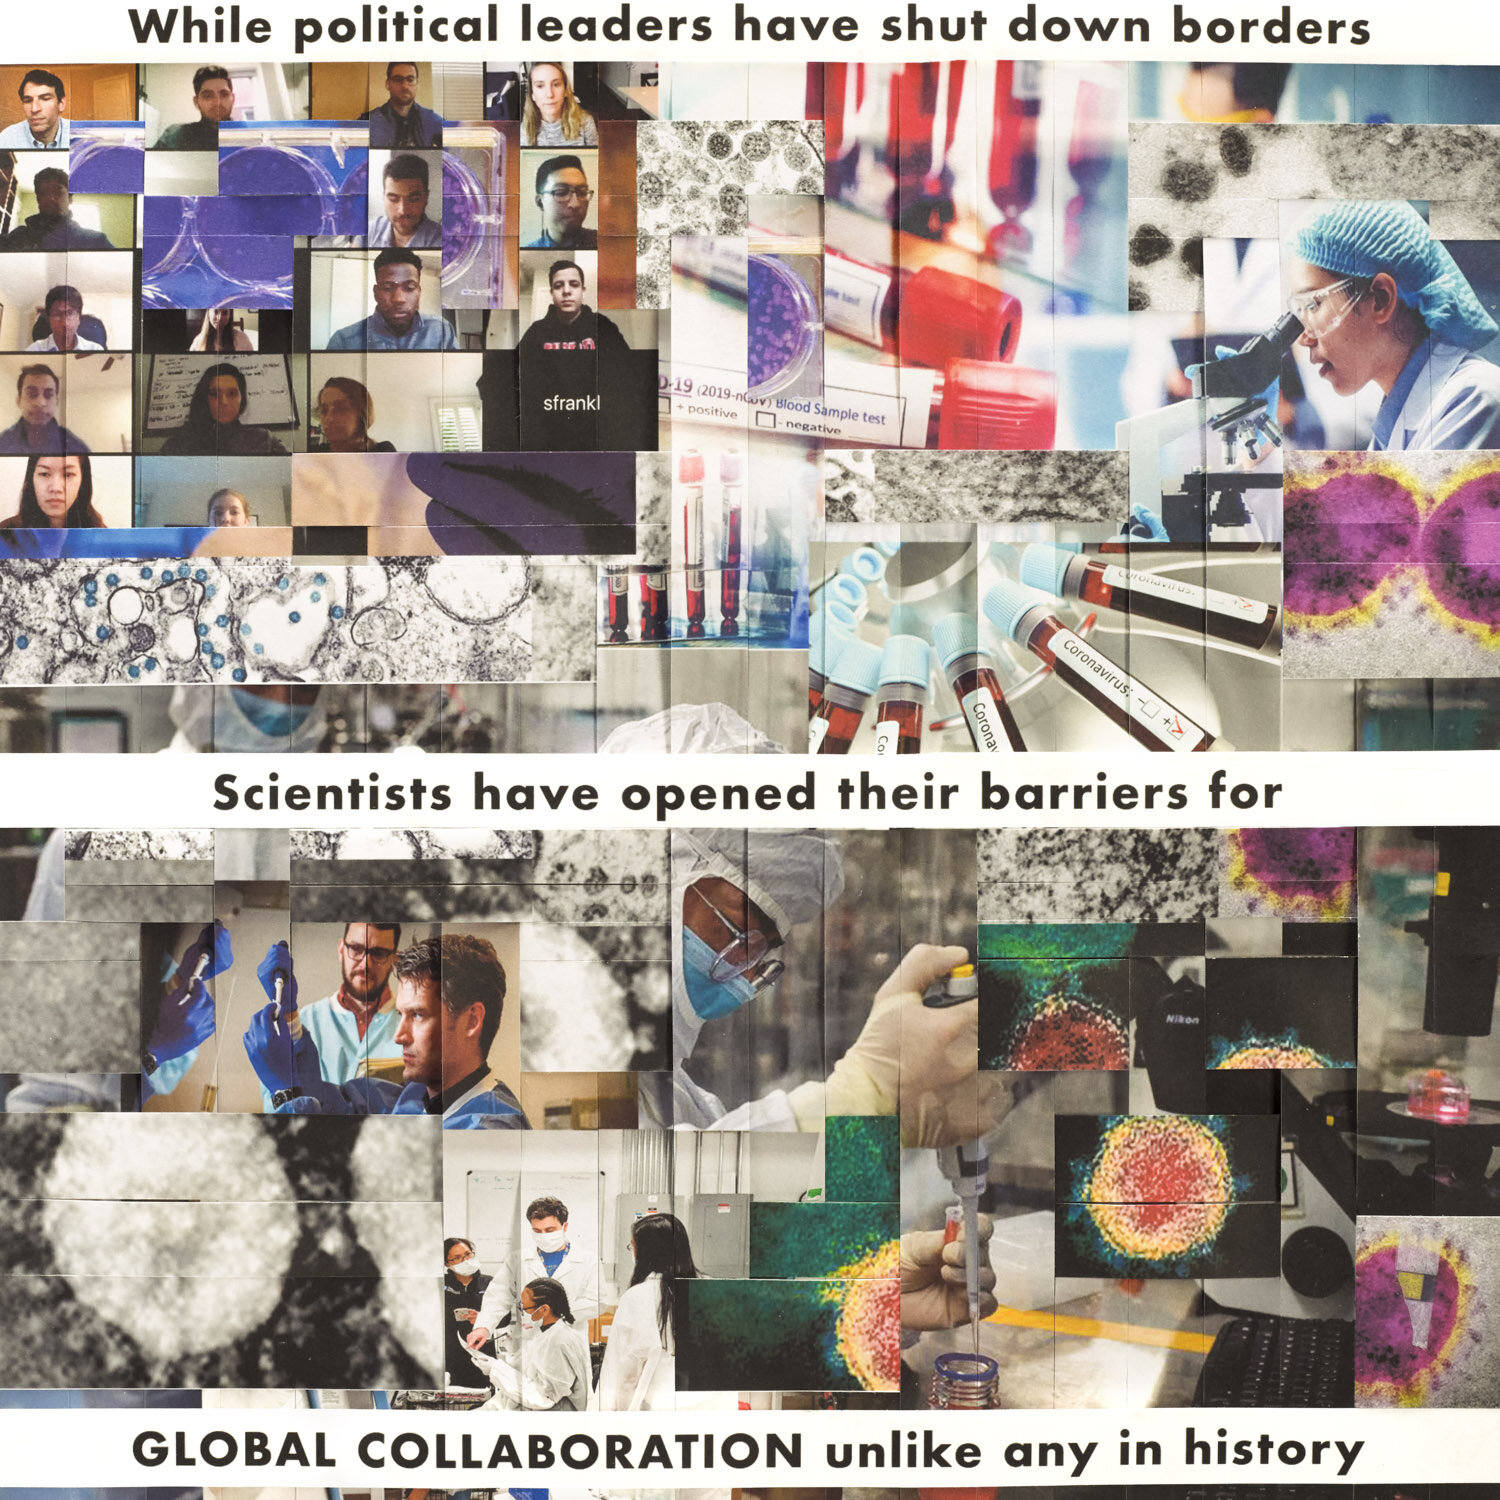 Day 75: “As never before, Global Collaboration”